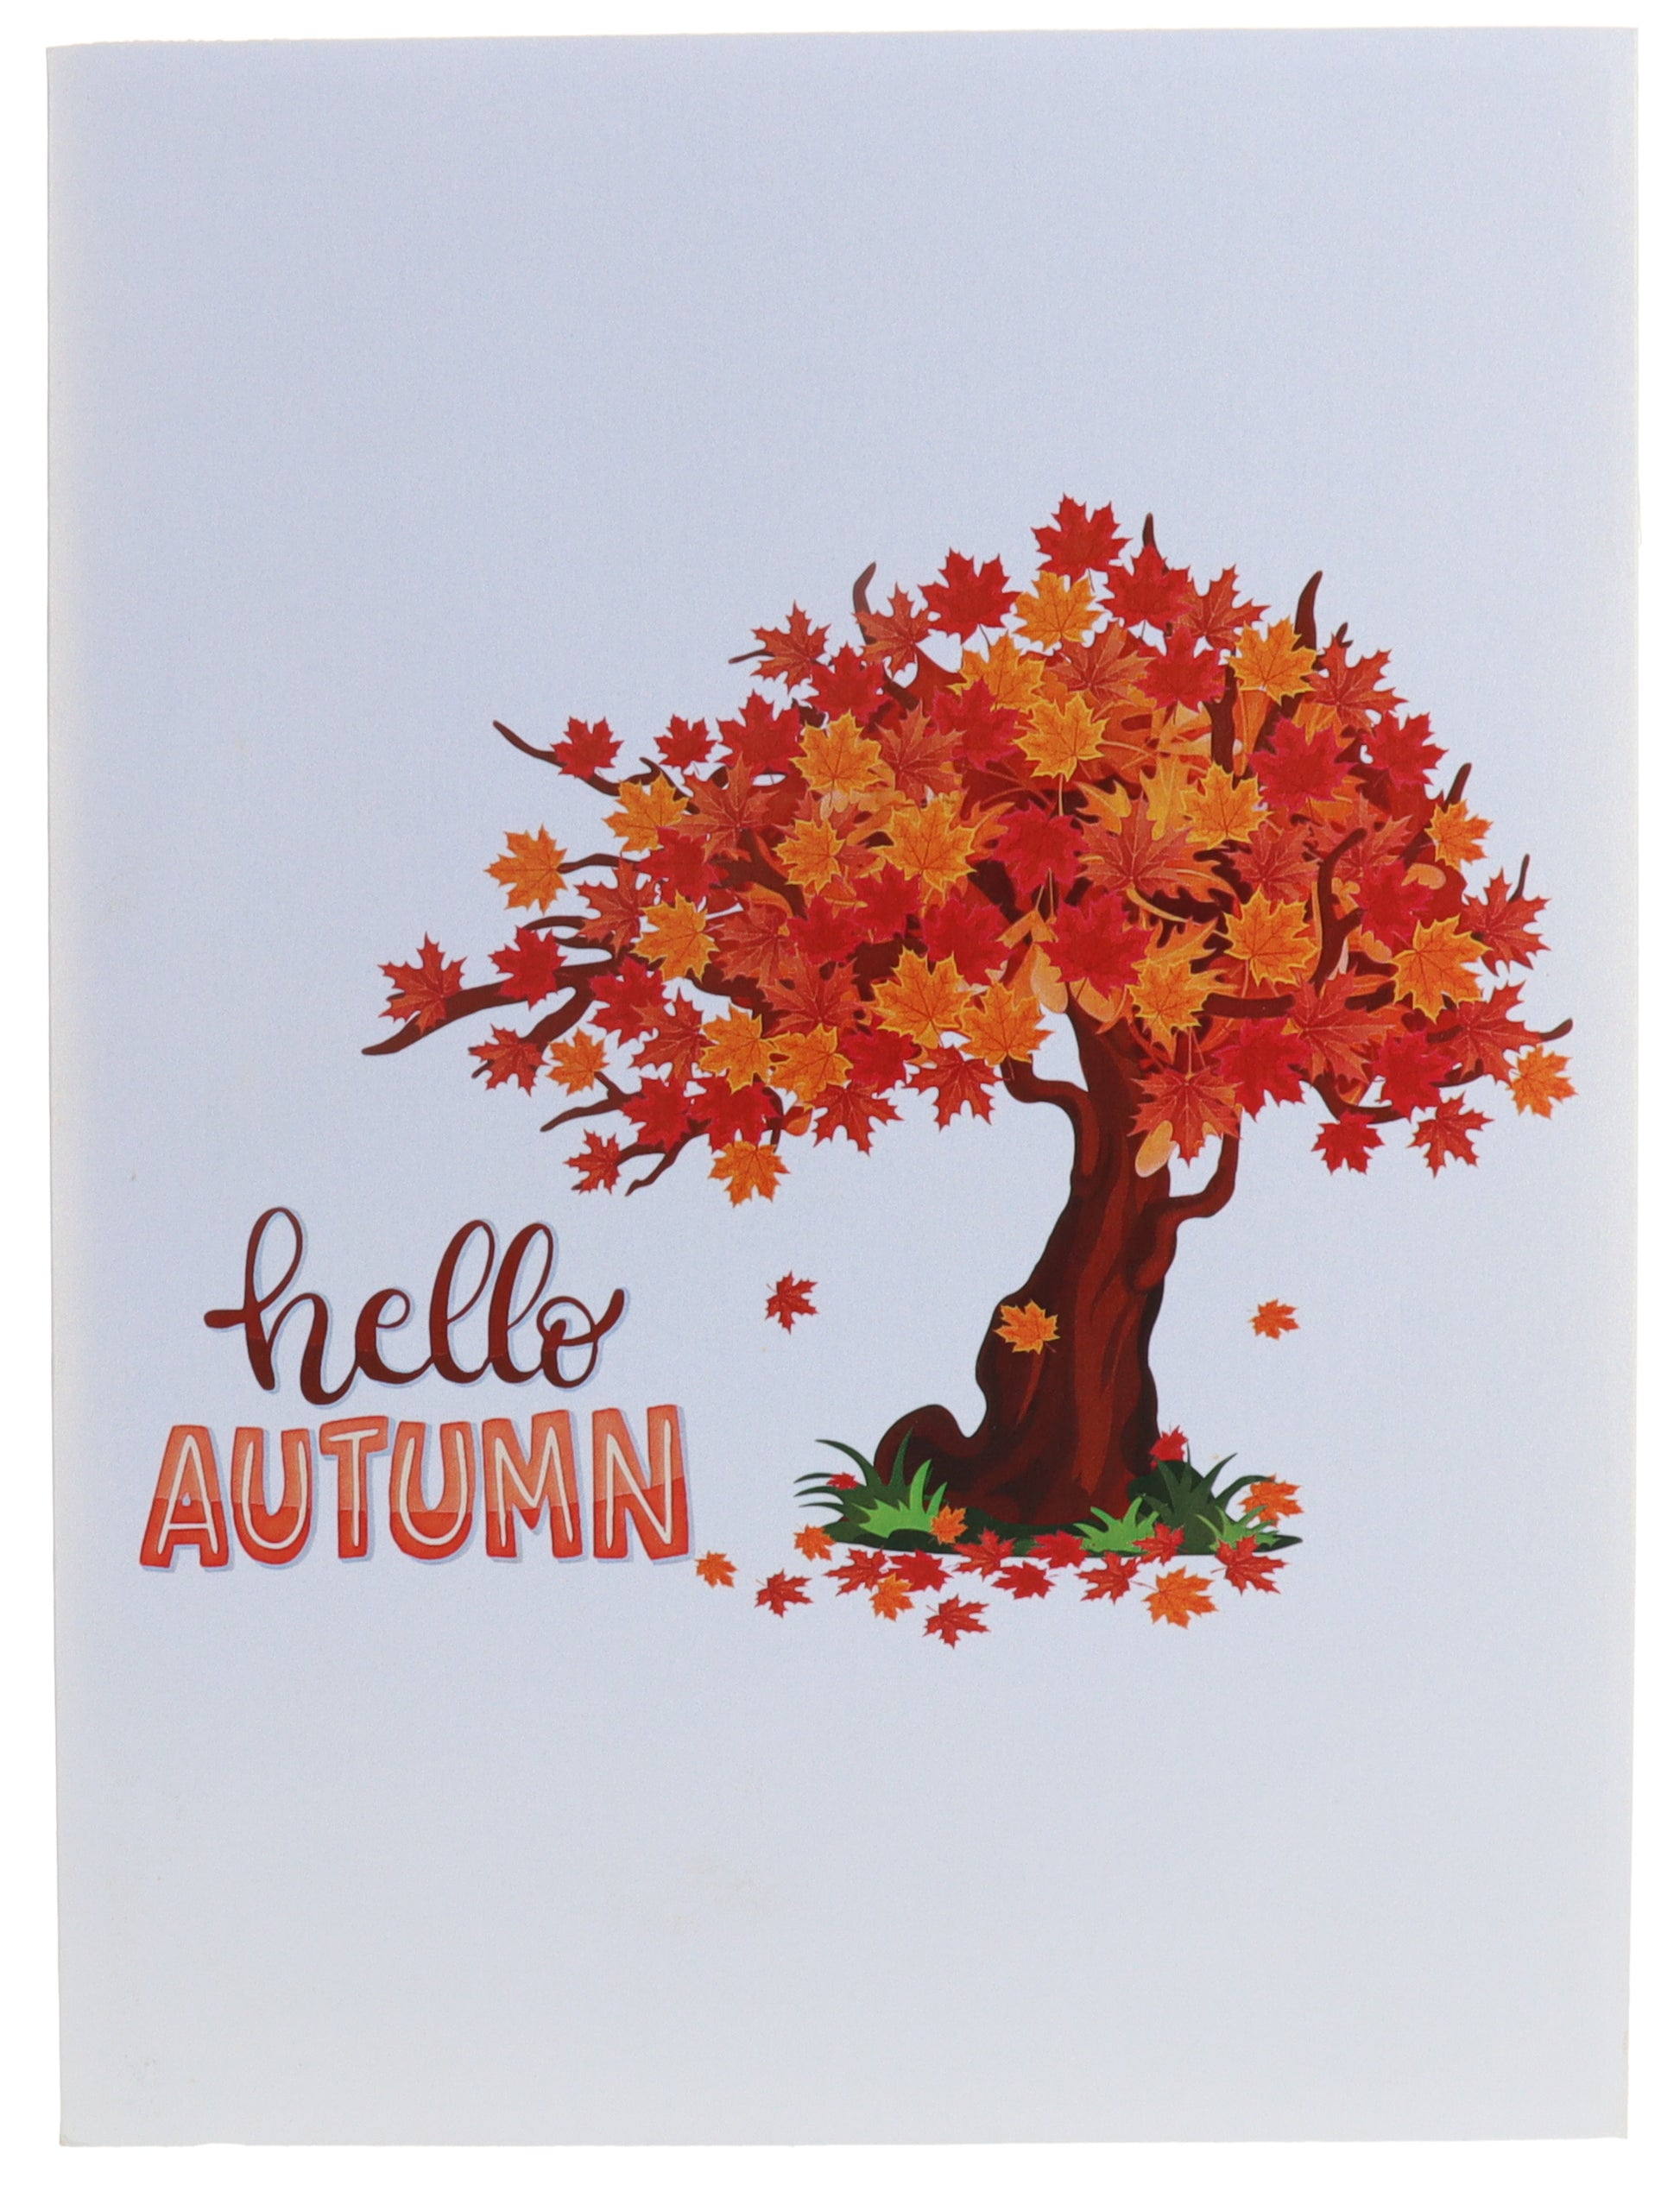 Hello Autumn Maple Tree 3D Pop Up Greeting Card - Autumn - best deal - Brighten Someone’s Day - Happ - iGifts And Cards